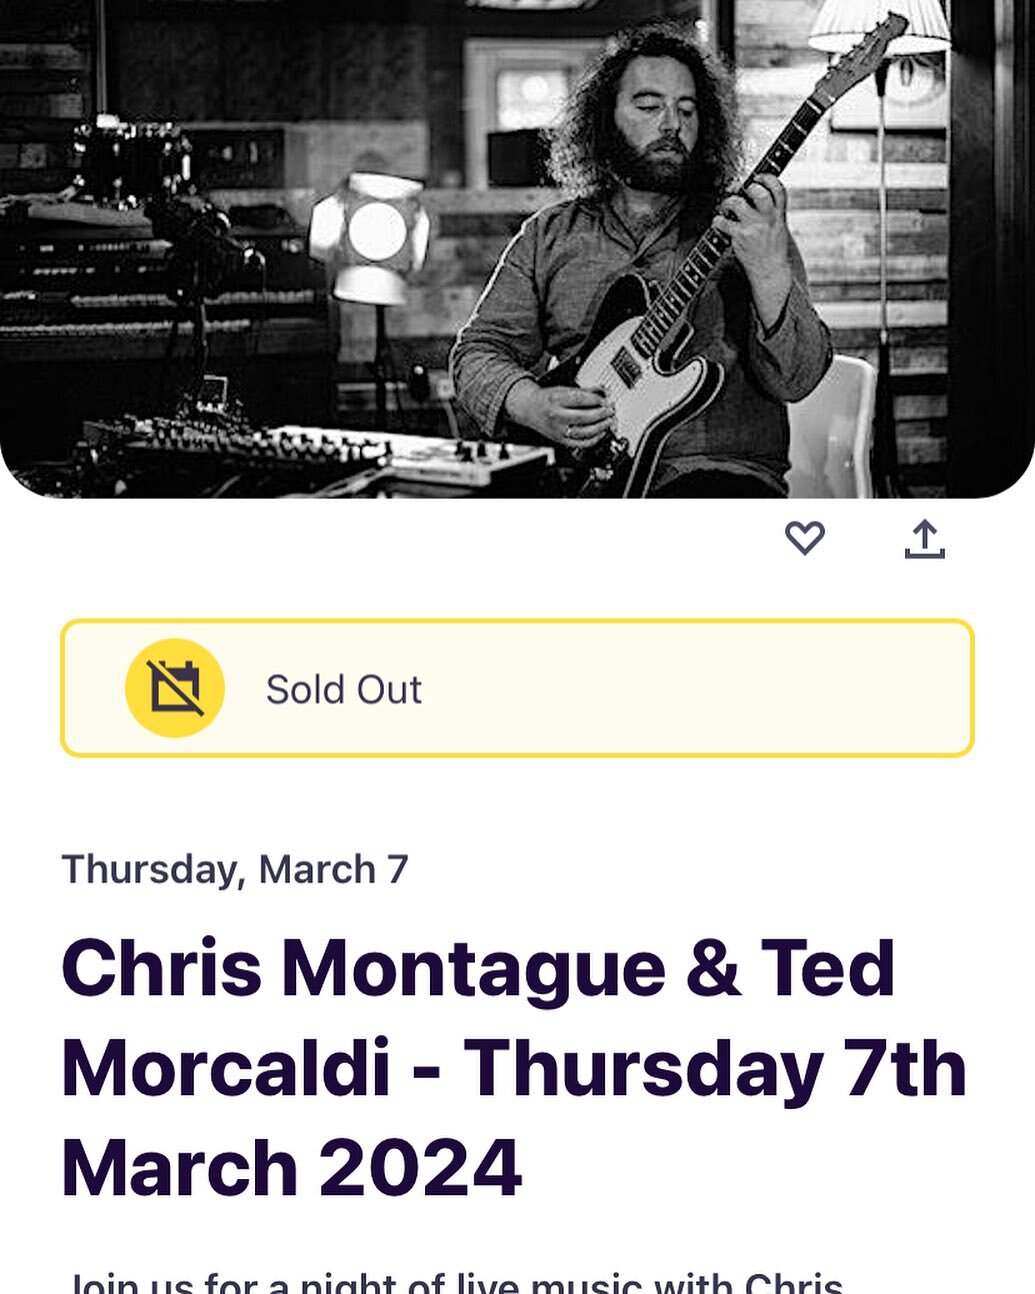 Sold out! Thanks to all who have gotten a ticket. Lots of new music in store for you. Can&rsquo;t wait!

@hotnumberscoffee 
@chrisrmontague62 
#guitar #guitarduo #ukjazz #ukguitarist #cambridge #cambridgemusic #cambridgejazz #livemusiccambridge